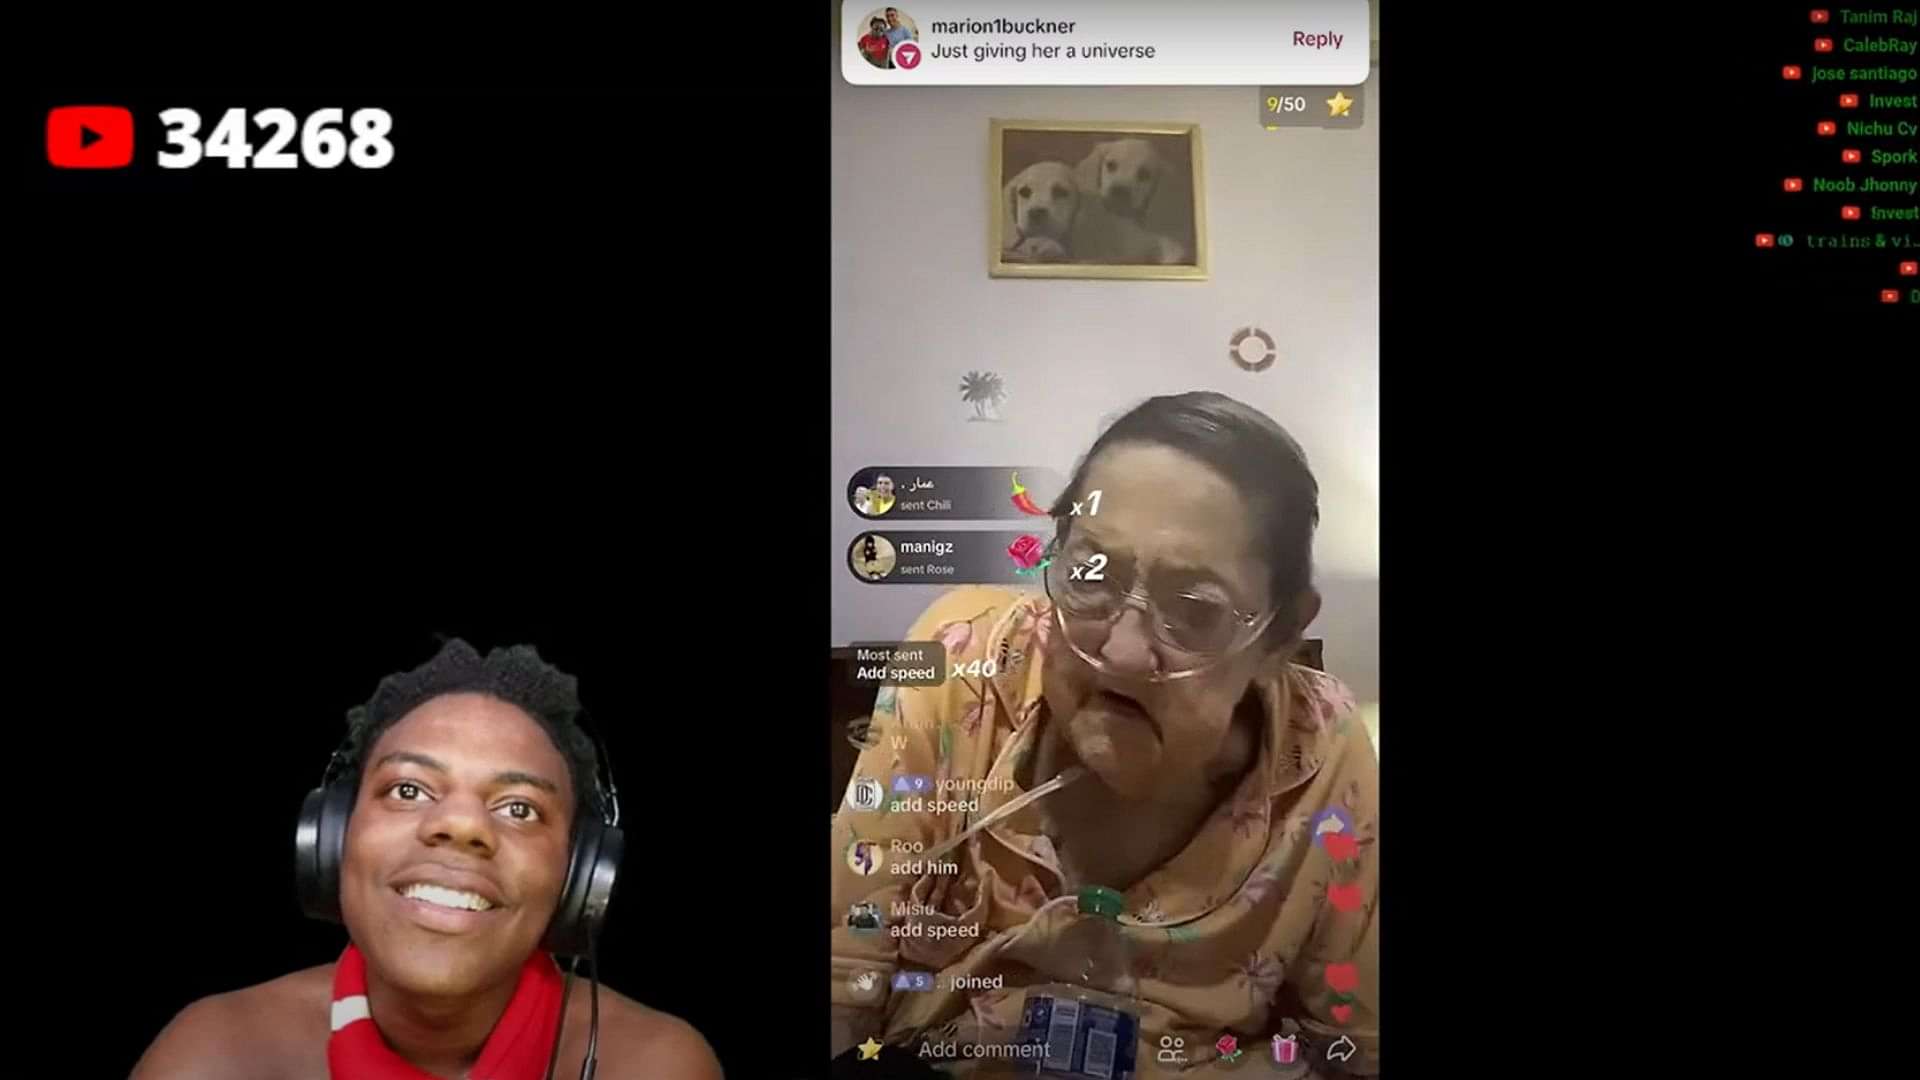 IShowSpeed sends an Old Woman a $10,000 TikTok gift and $500